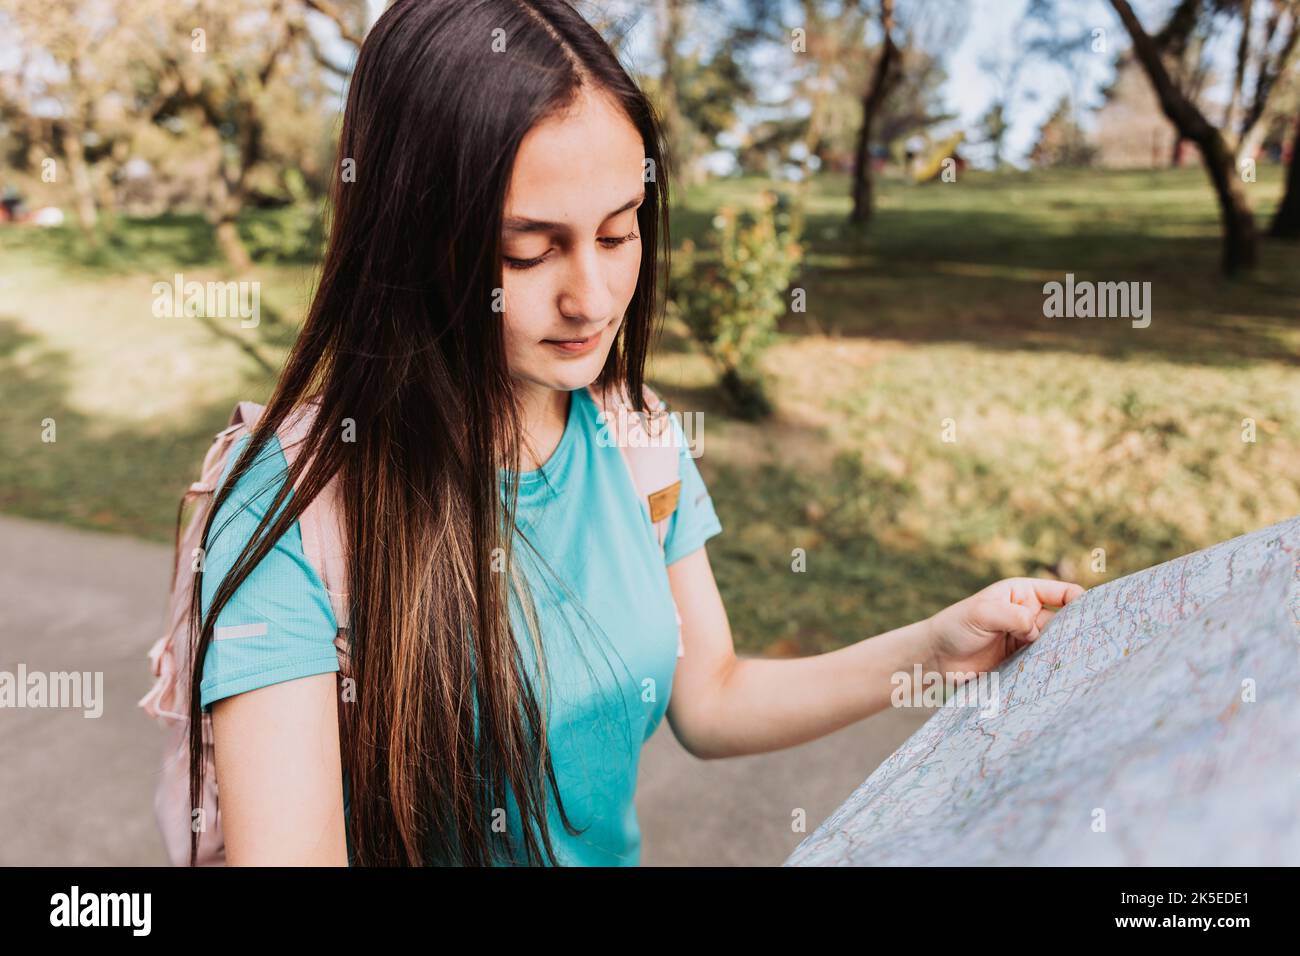 Young girl tourist, wearing turquoise t shirt and a pink backpack, checking the map during trek in the park Stock Photo